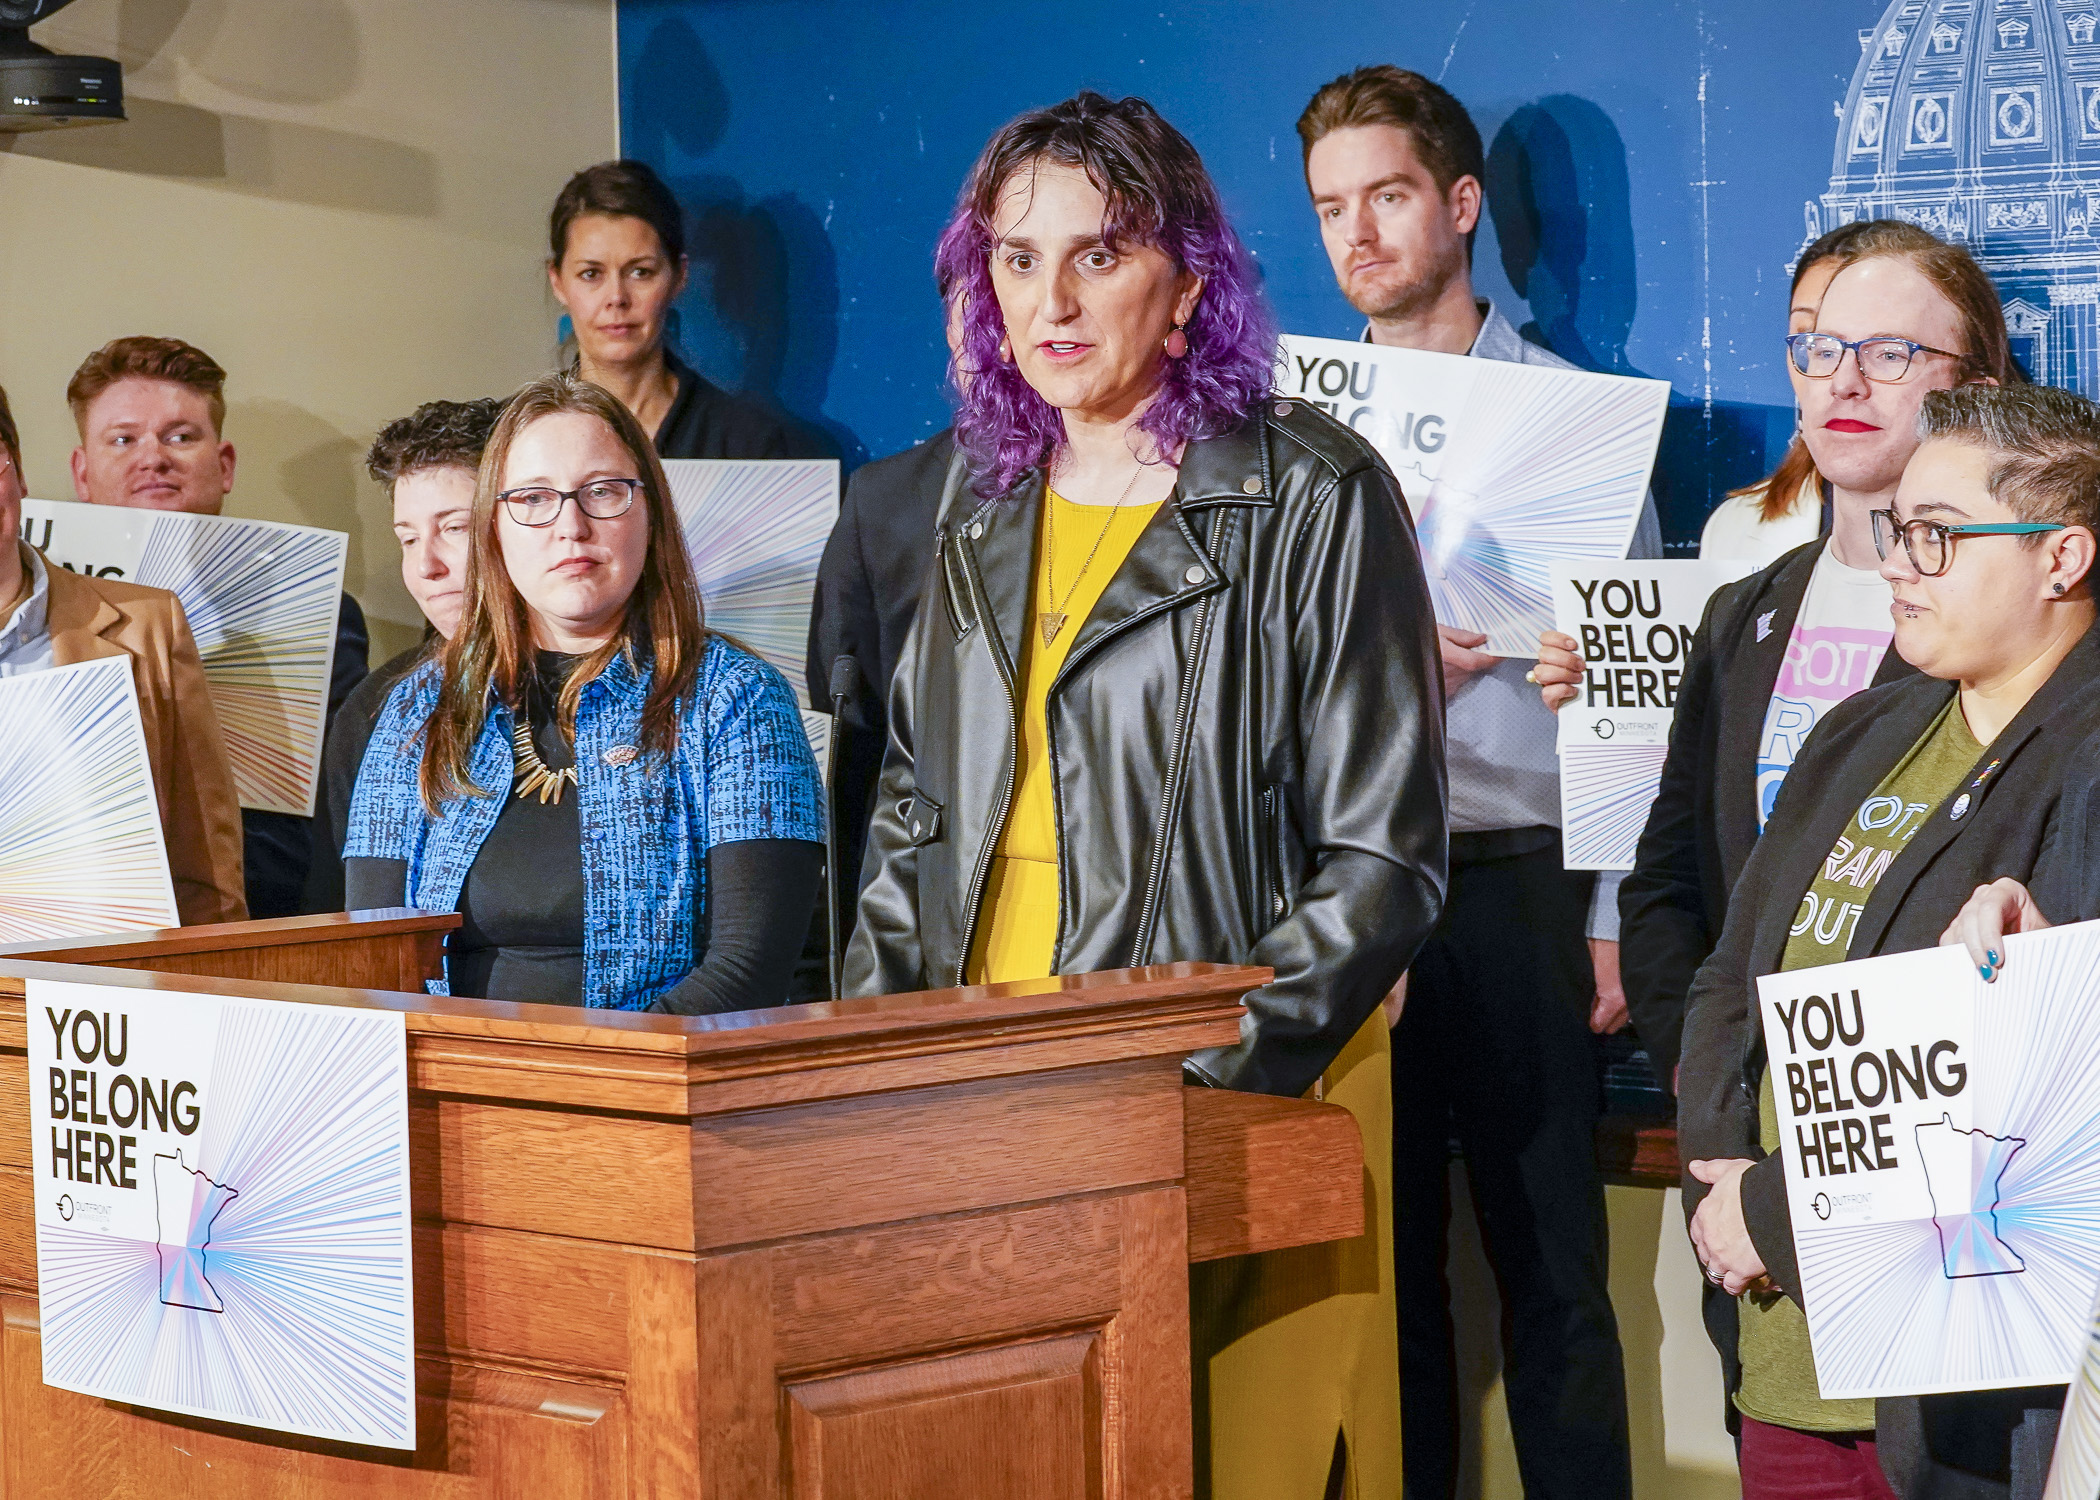 House passes bill to establish Minnesota as a trans refuge state - Session Daily